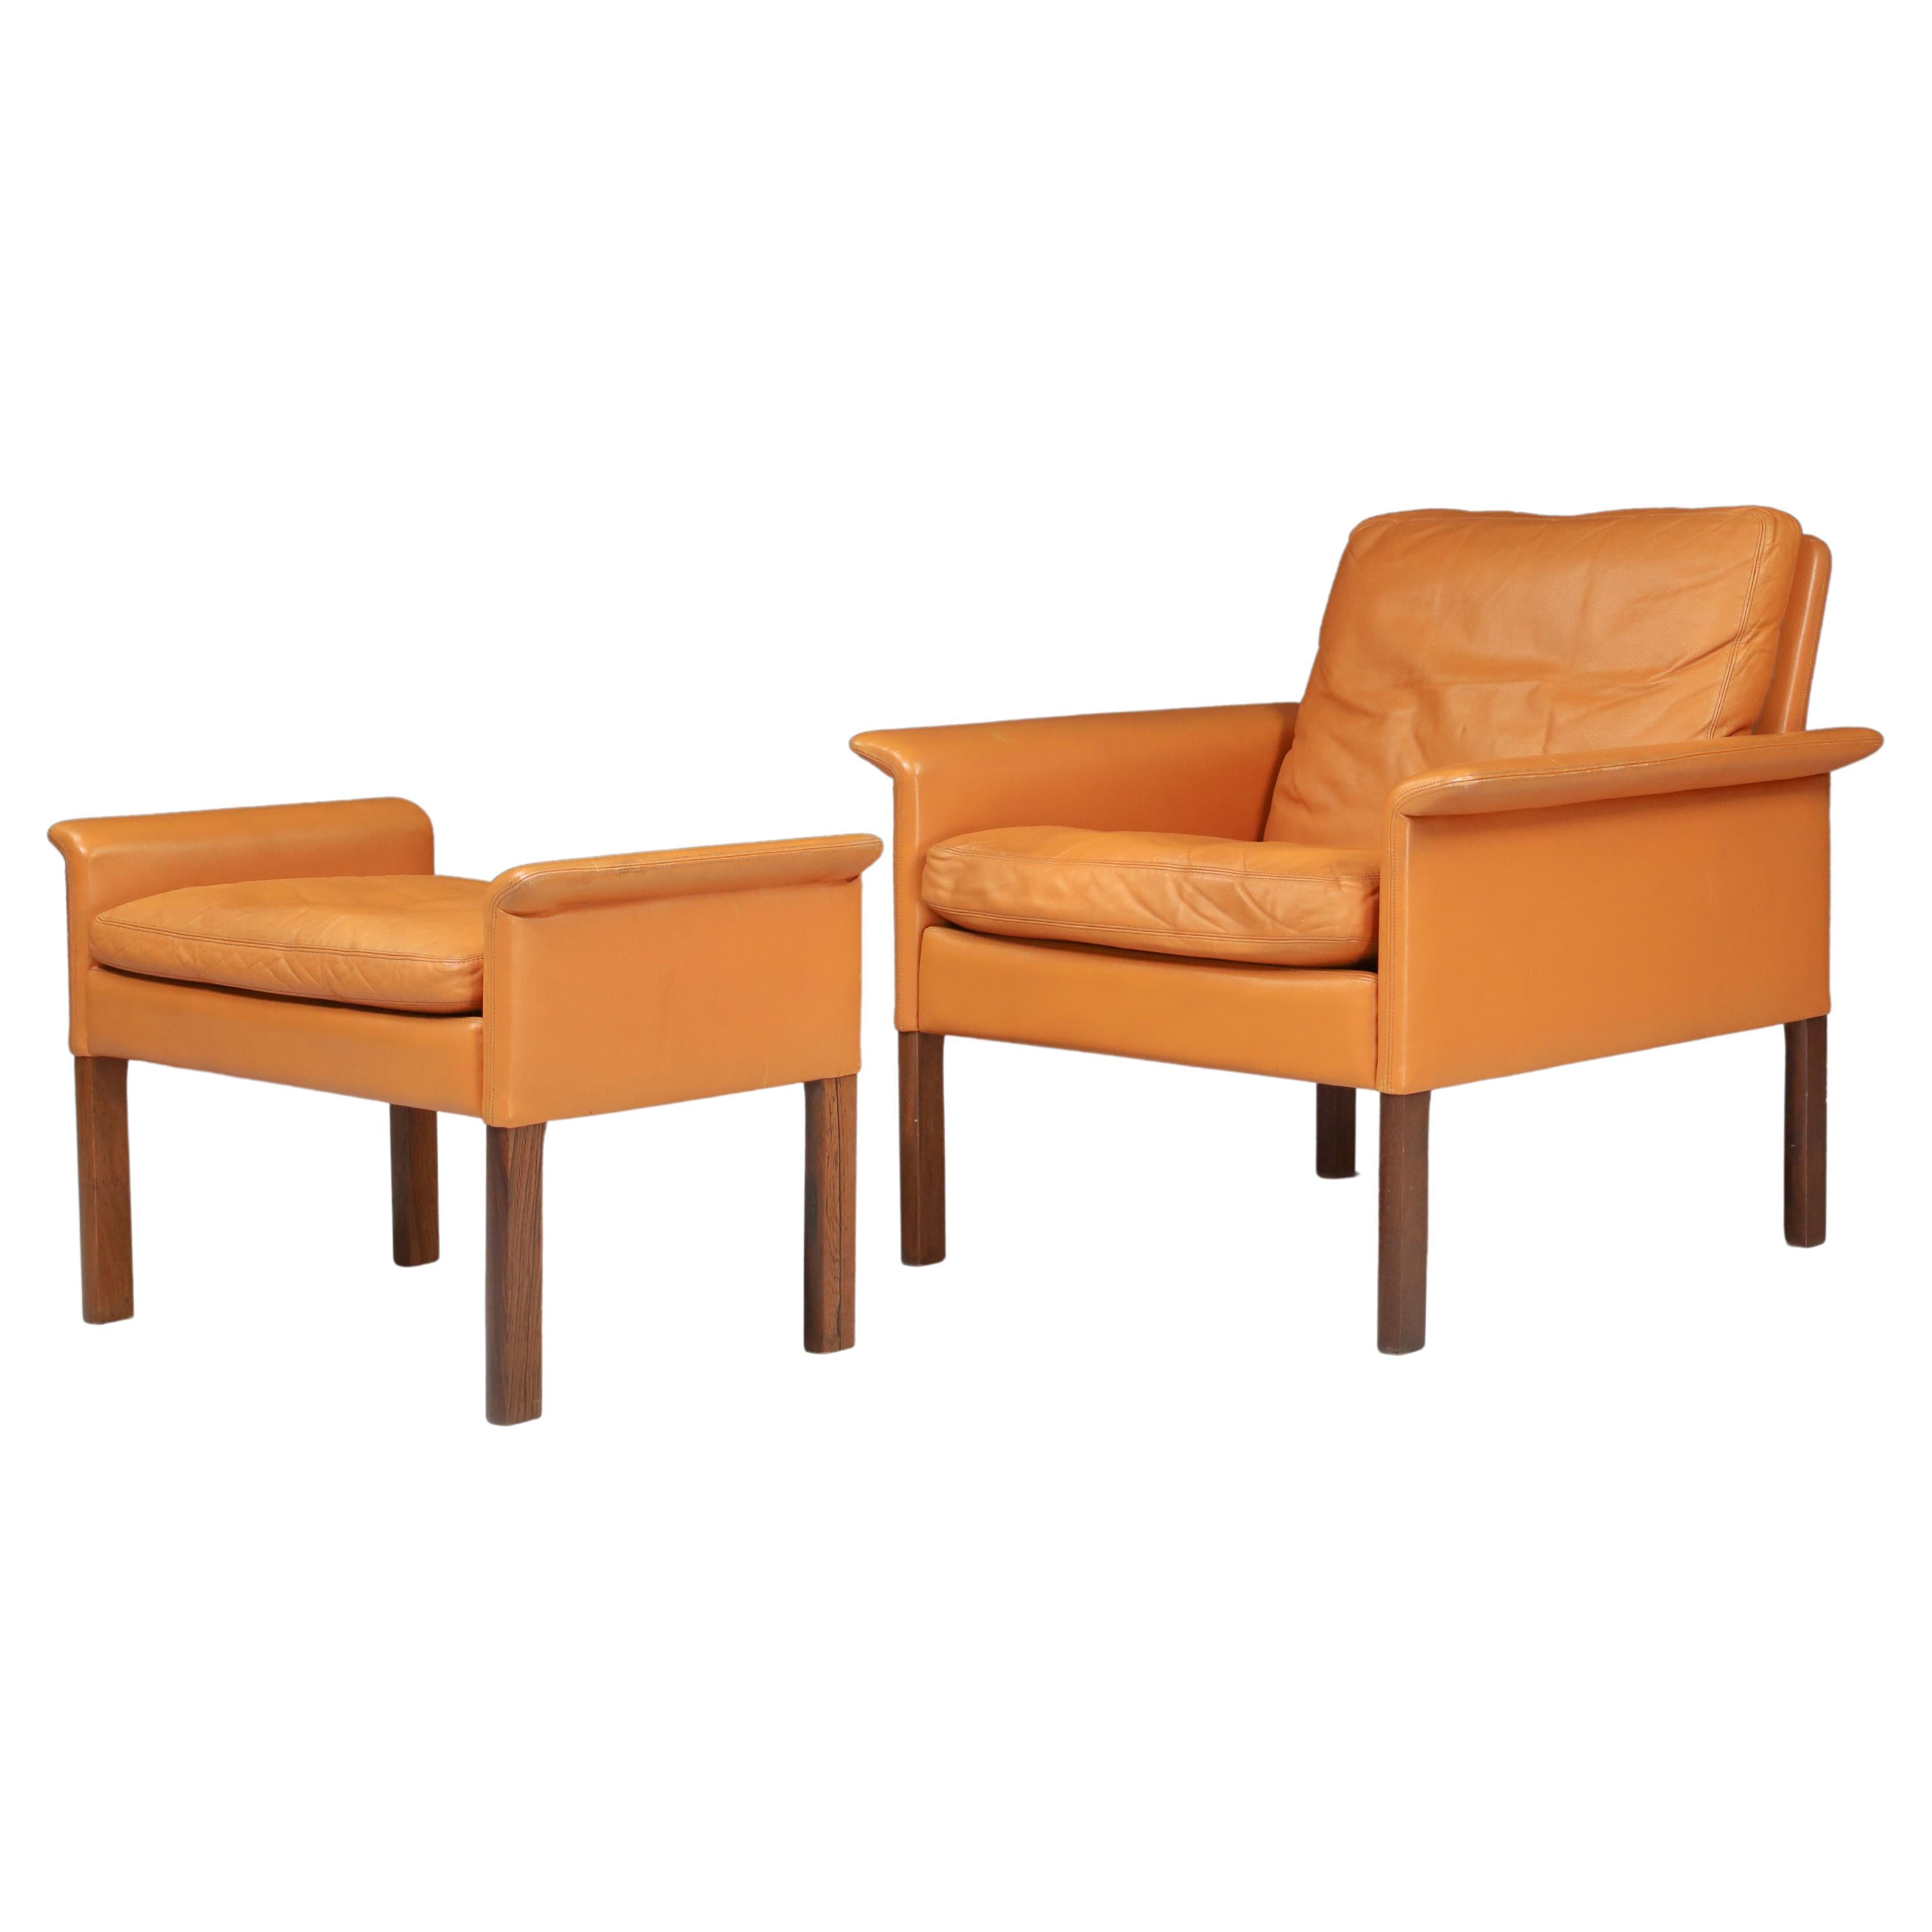 Hans Olsen for C/S Møbler, Lounge Chair and Ottoman in Walnut and Leather 1960s For Sale